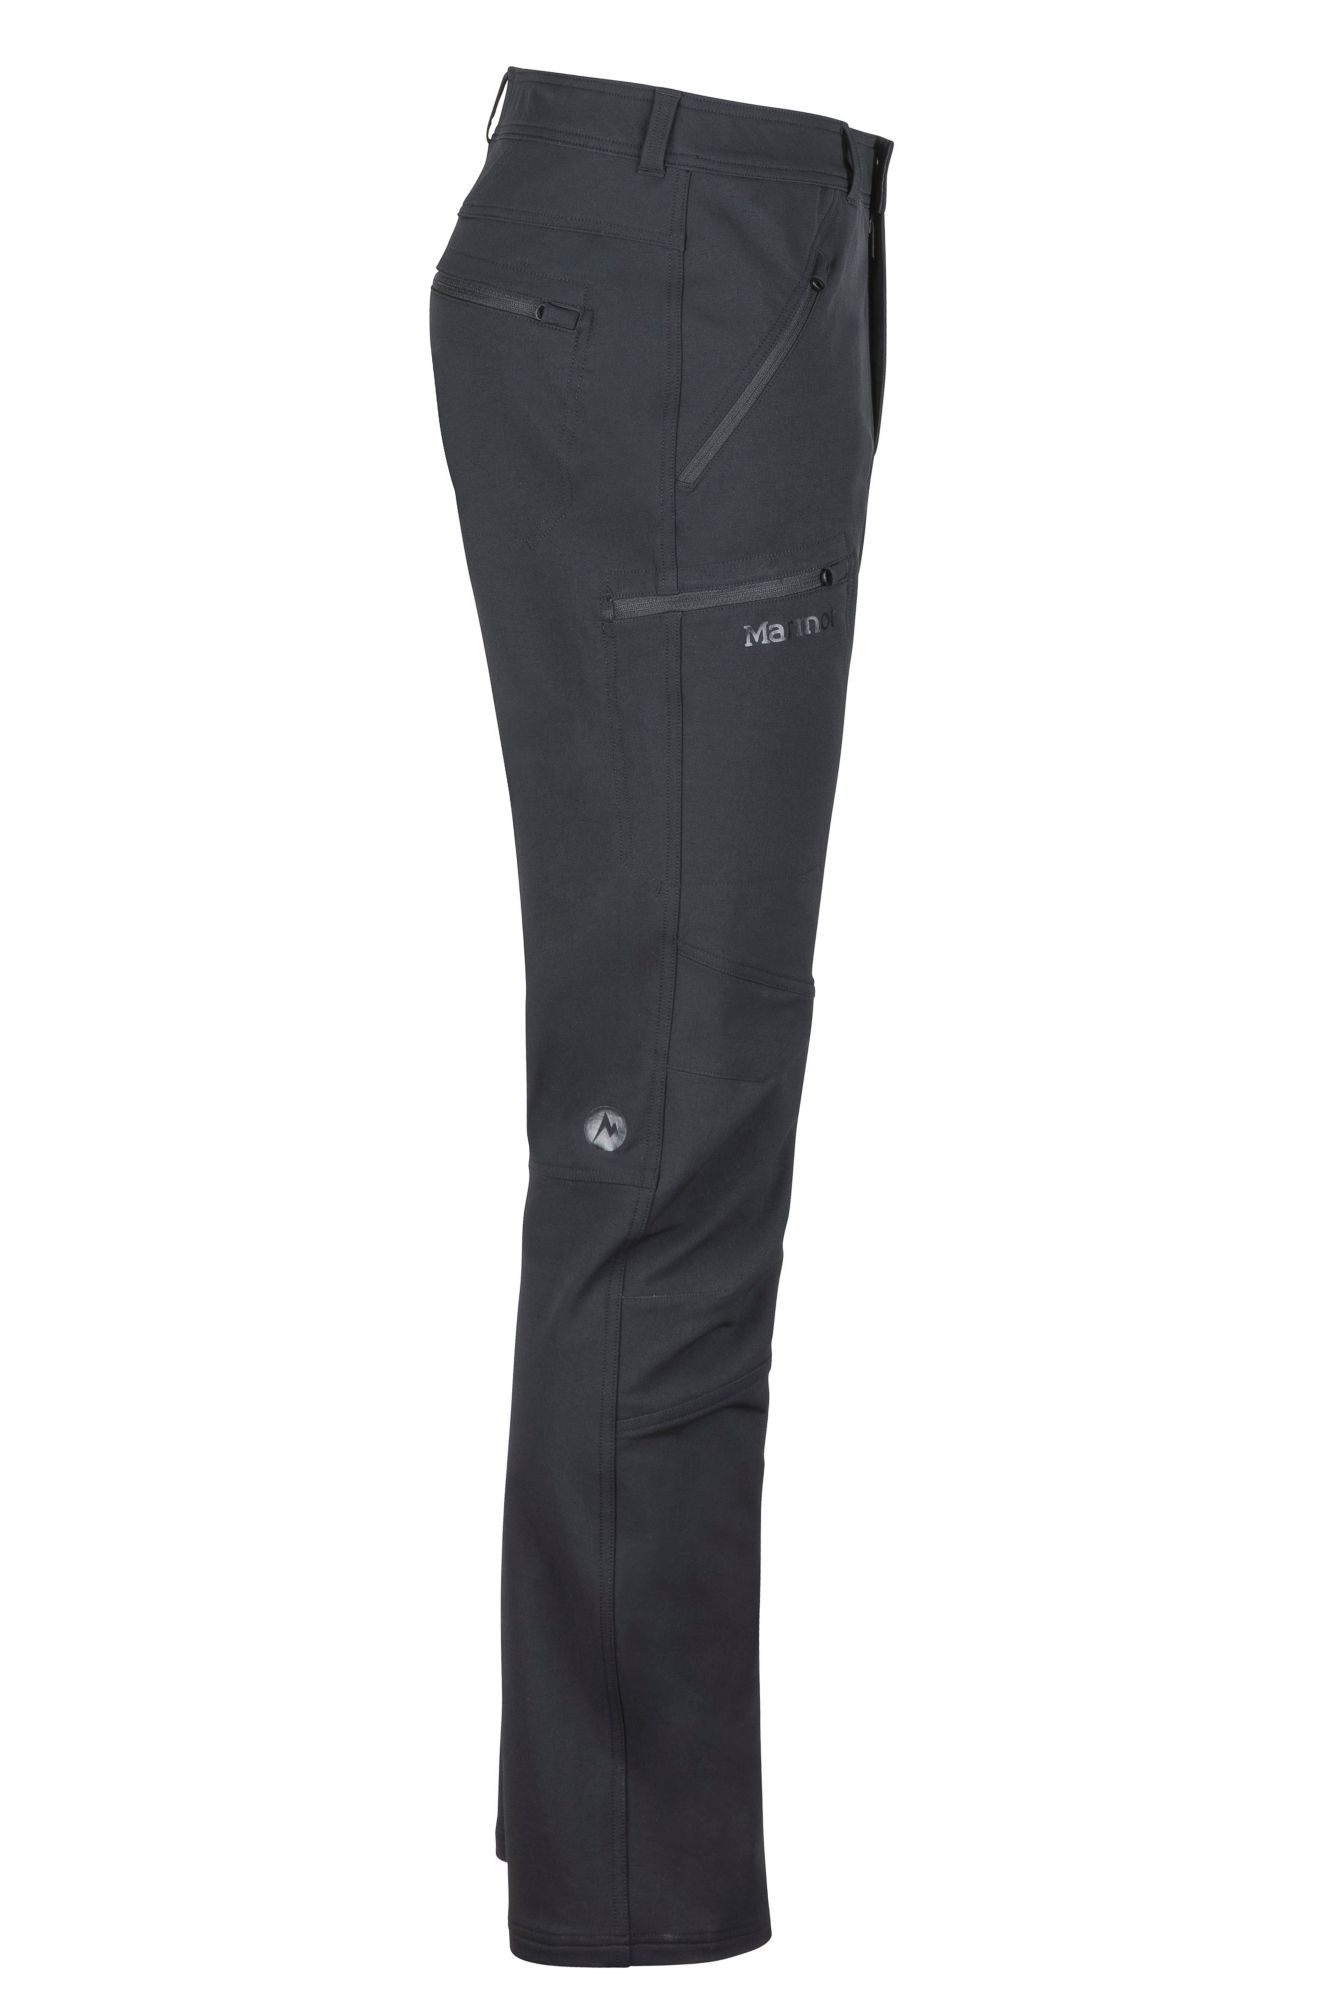 winter backpacking pants